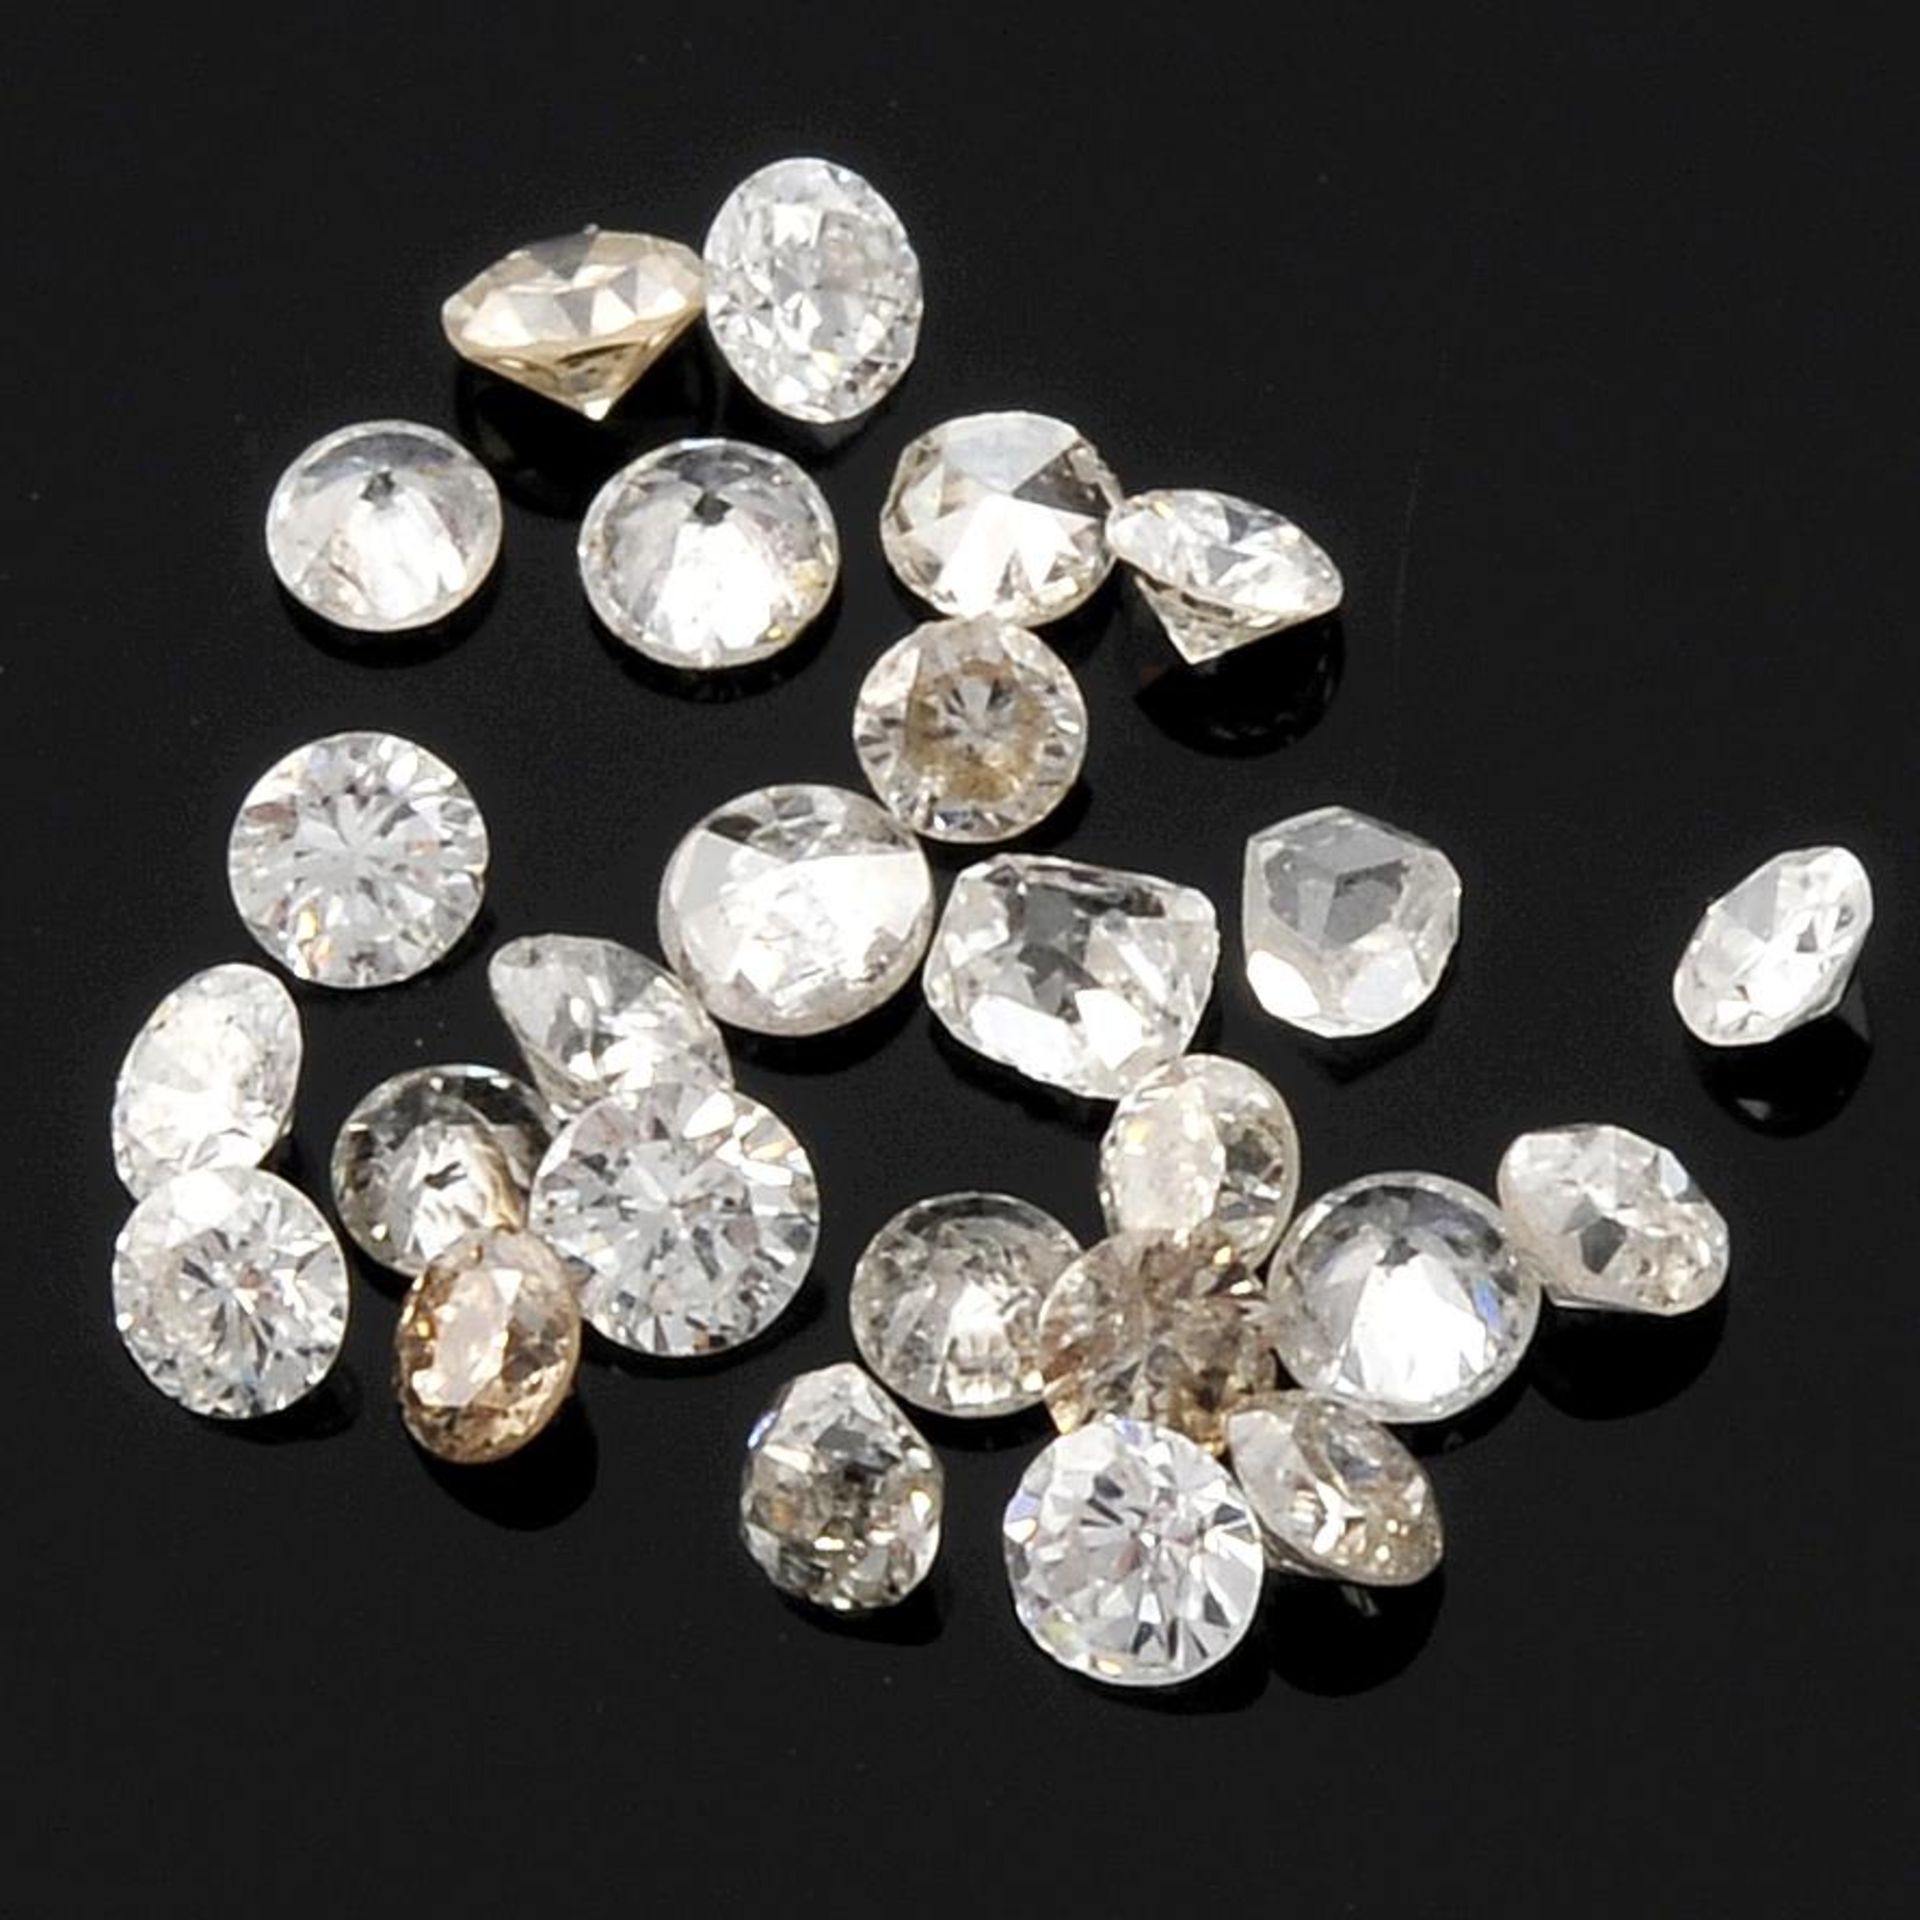 Selection of brilliant cut diamonds, weighing 4.8ct.